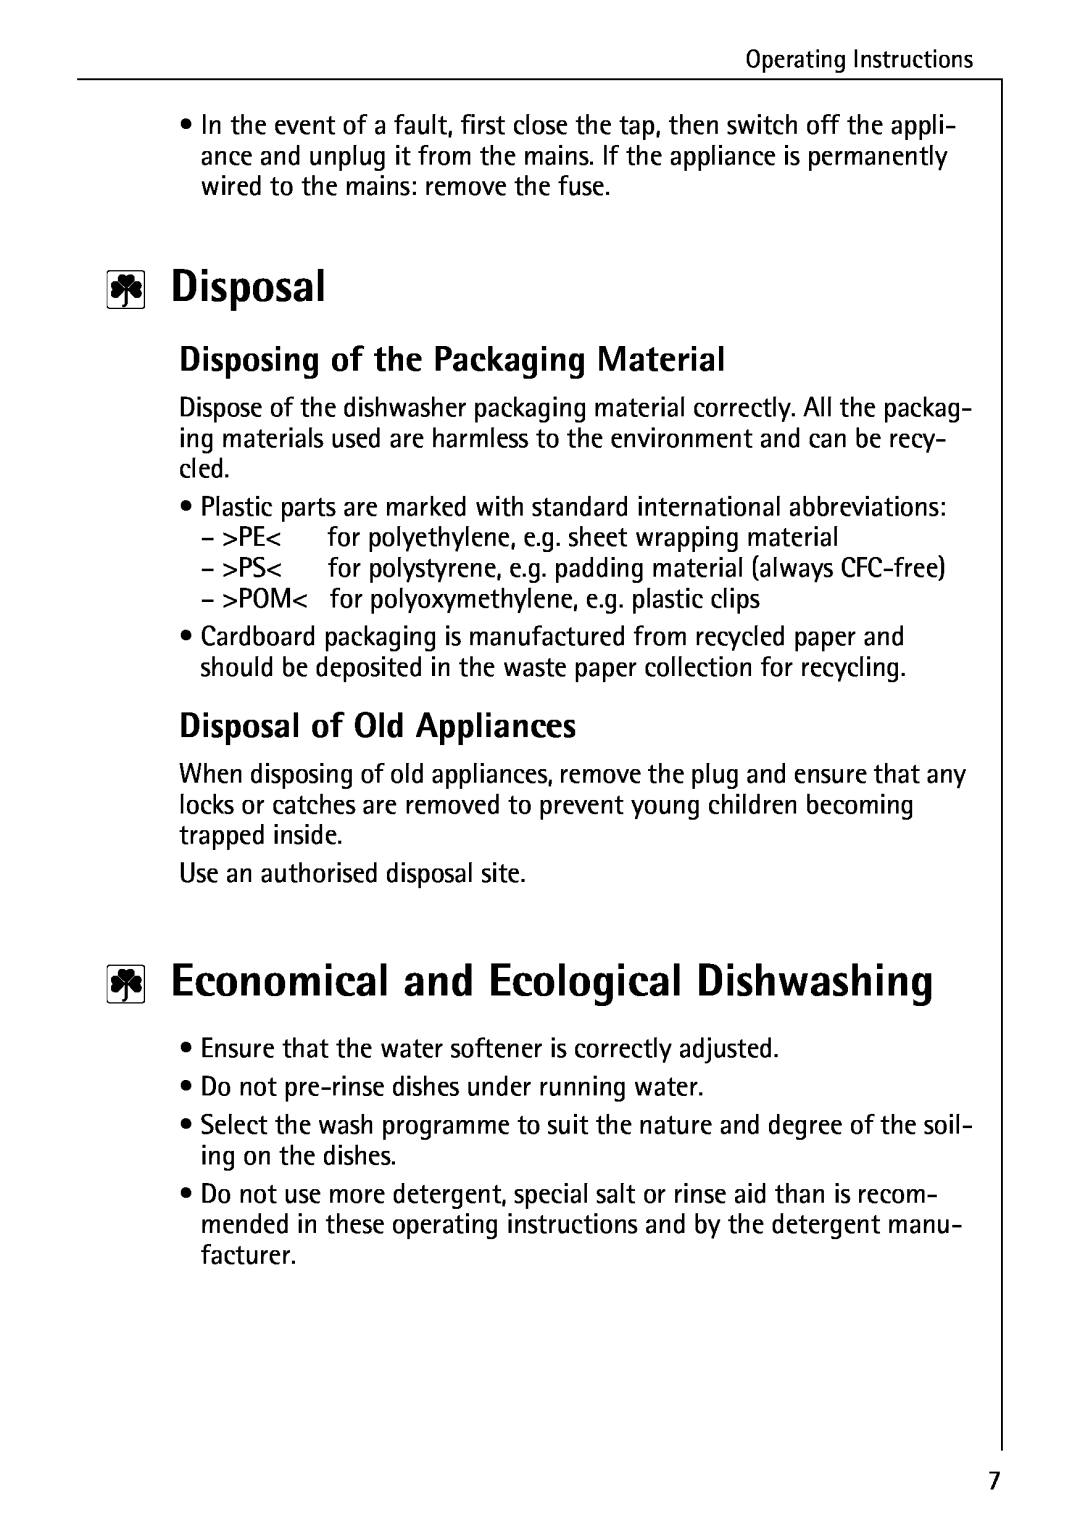 Electrolux 40250 i manual Disposal, Economical and Ecological Dishwashing, Disposing of the Packaging Material 